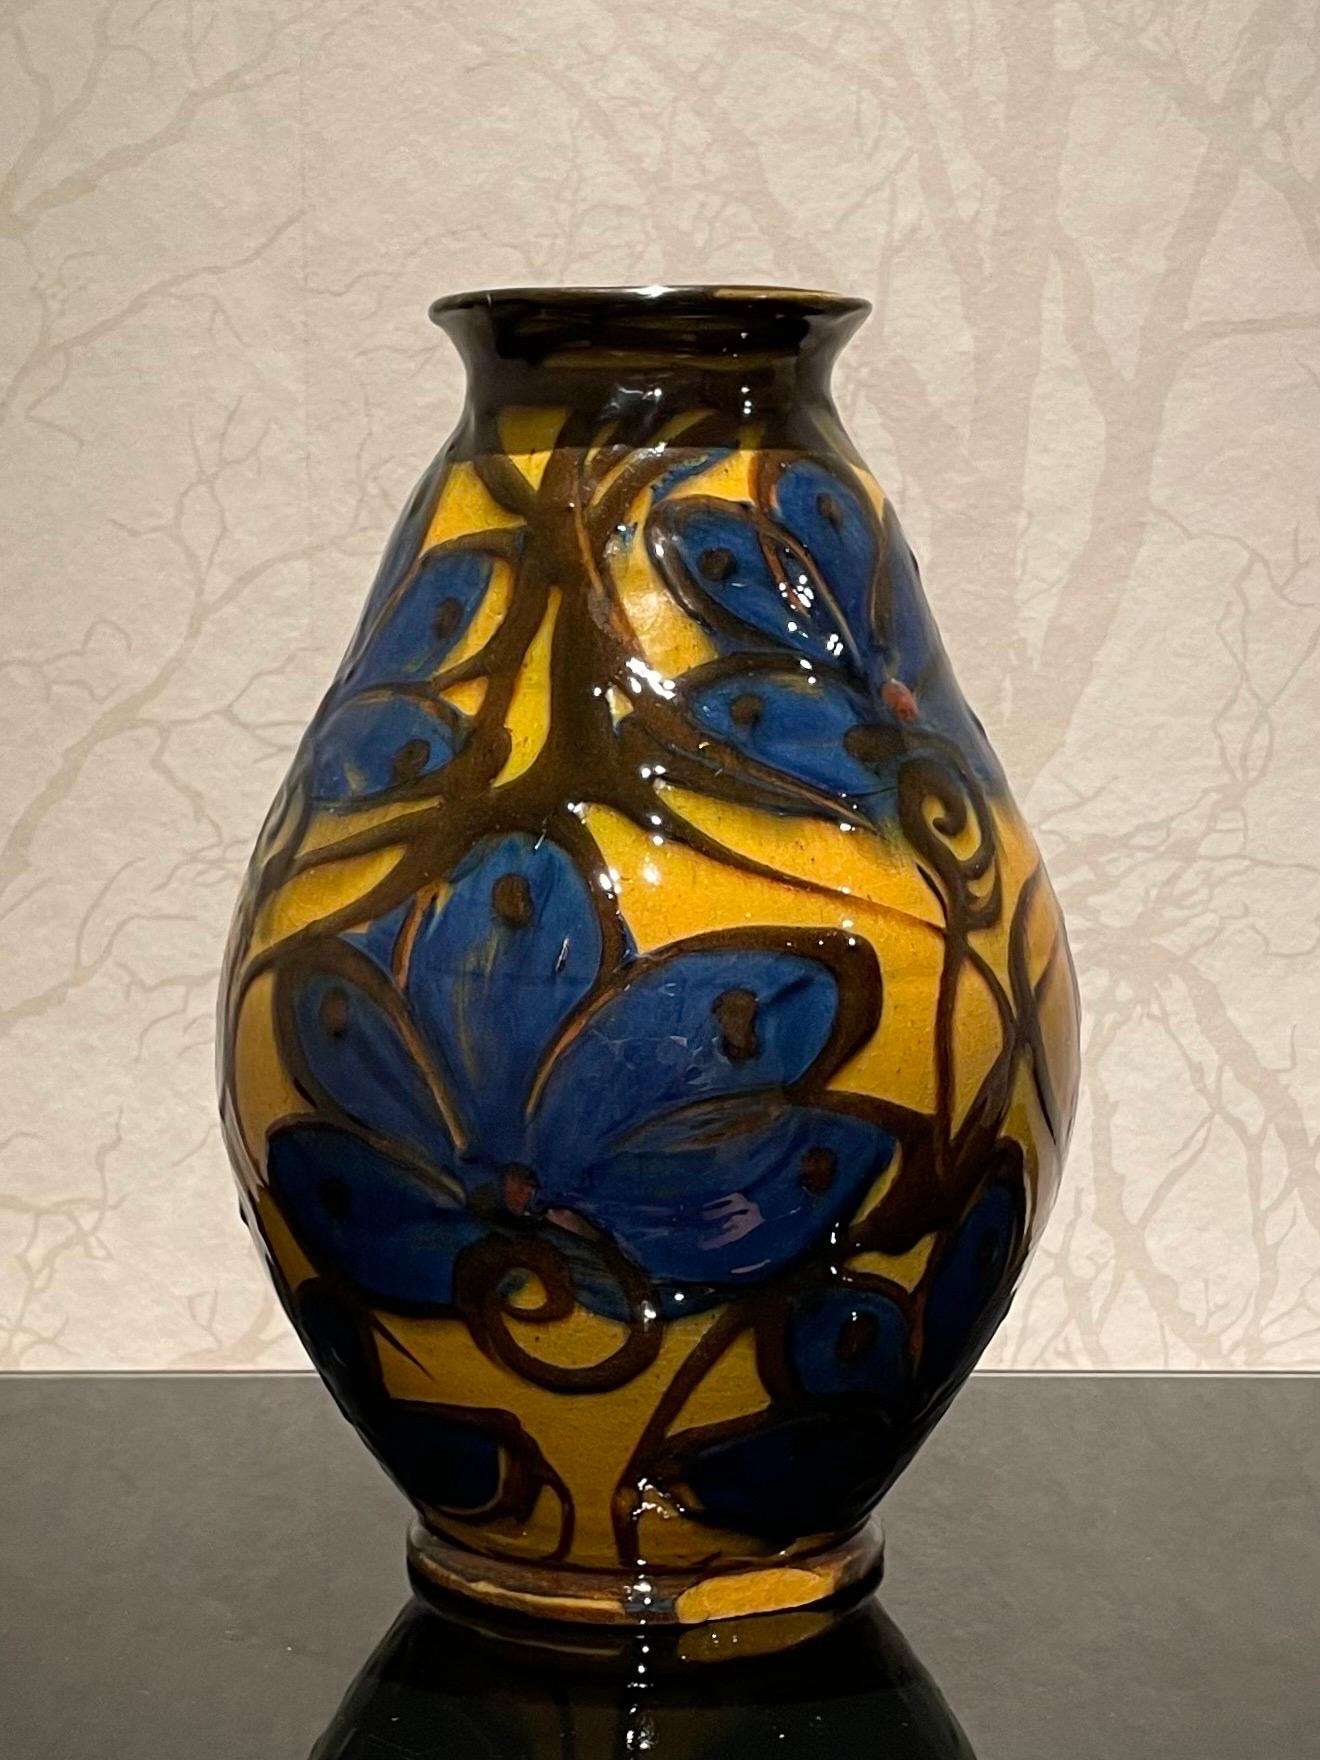 This is the 1920s Danish 27 cm high ceramic vase by Herman Kähler. 

This vase comes with a baluster shaped body, high glossy surface and deep brown and blue colors on a base of a mustard yellow uranium glaze. 
It has a beautiful cow horn glazed